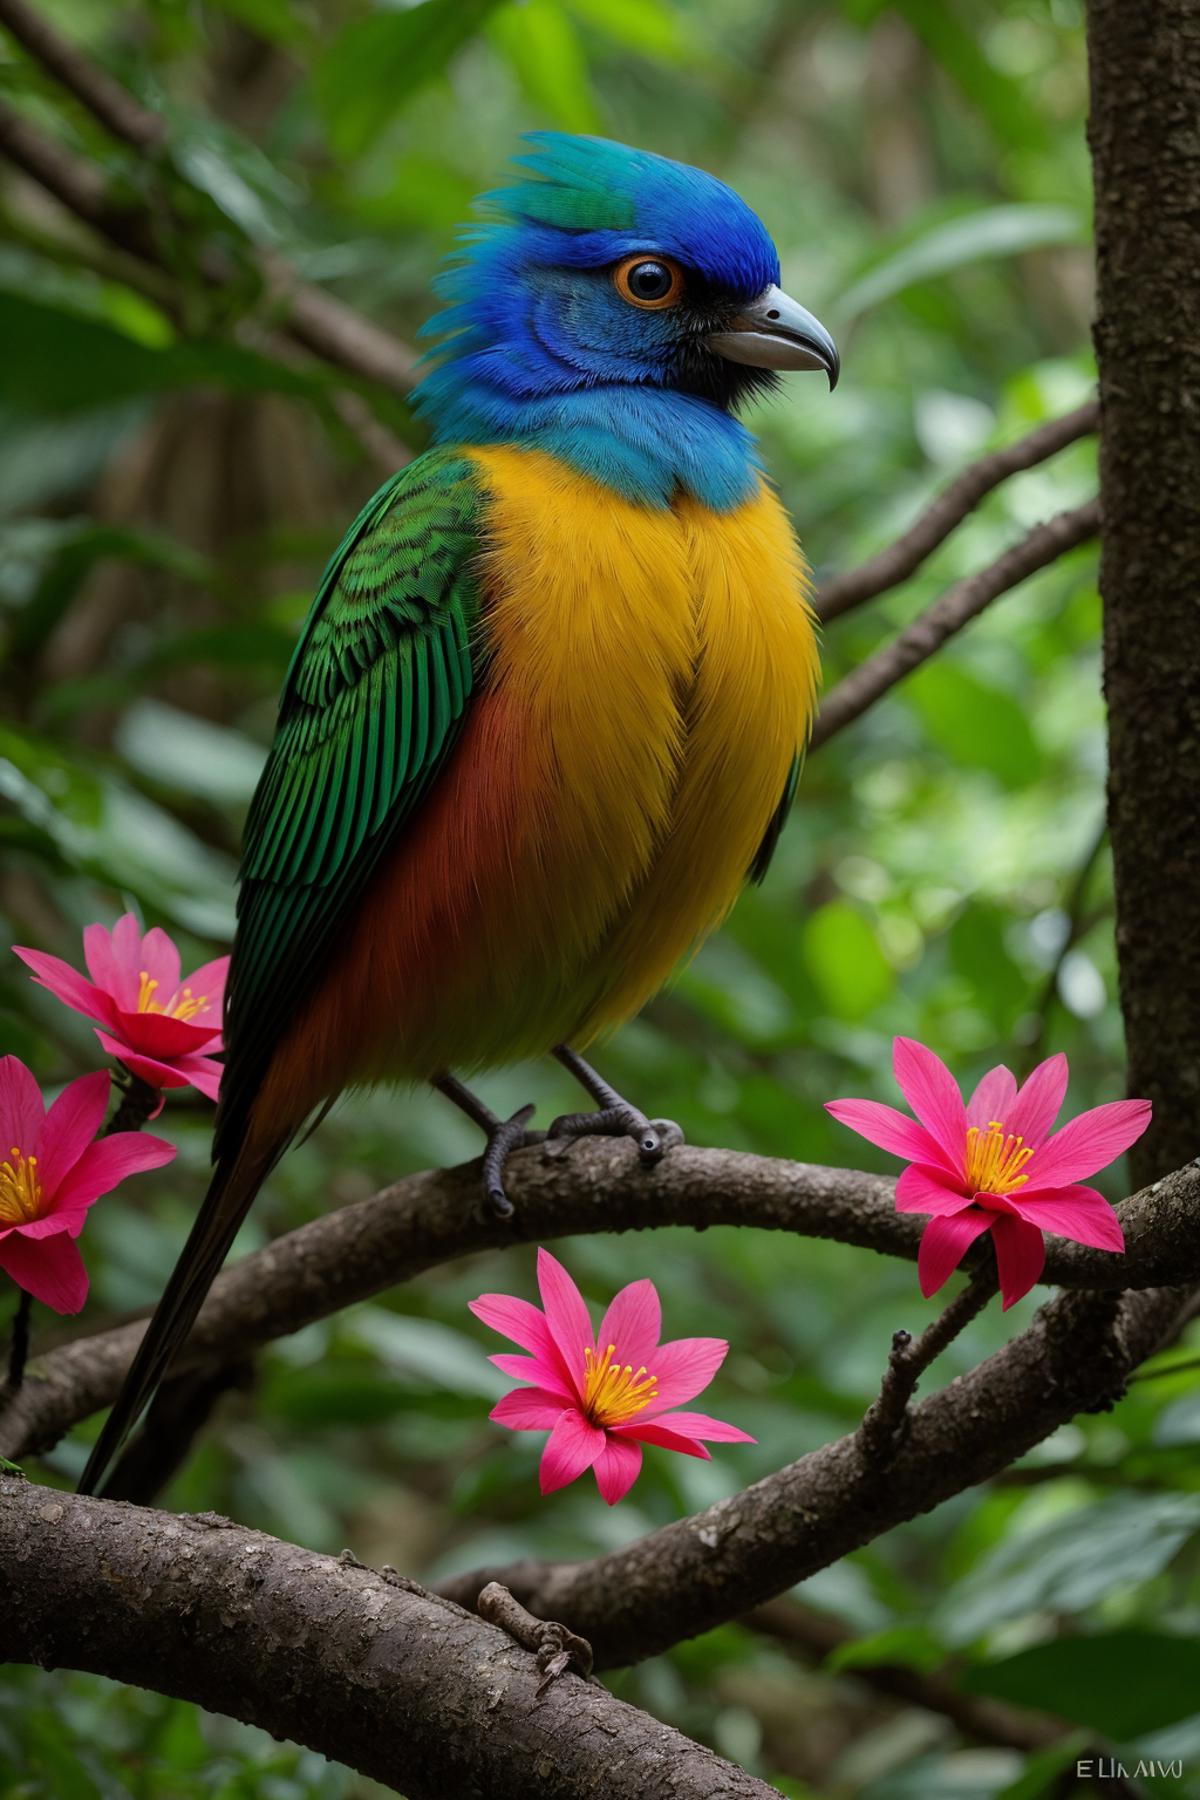 Colorful Parrot Perched on Tree Branch with Pink and Yellow Flowers